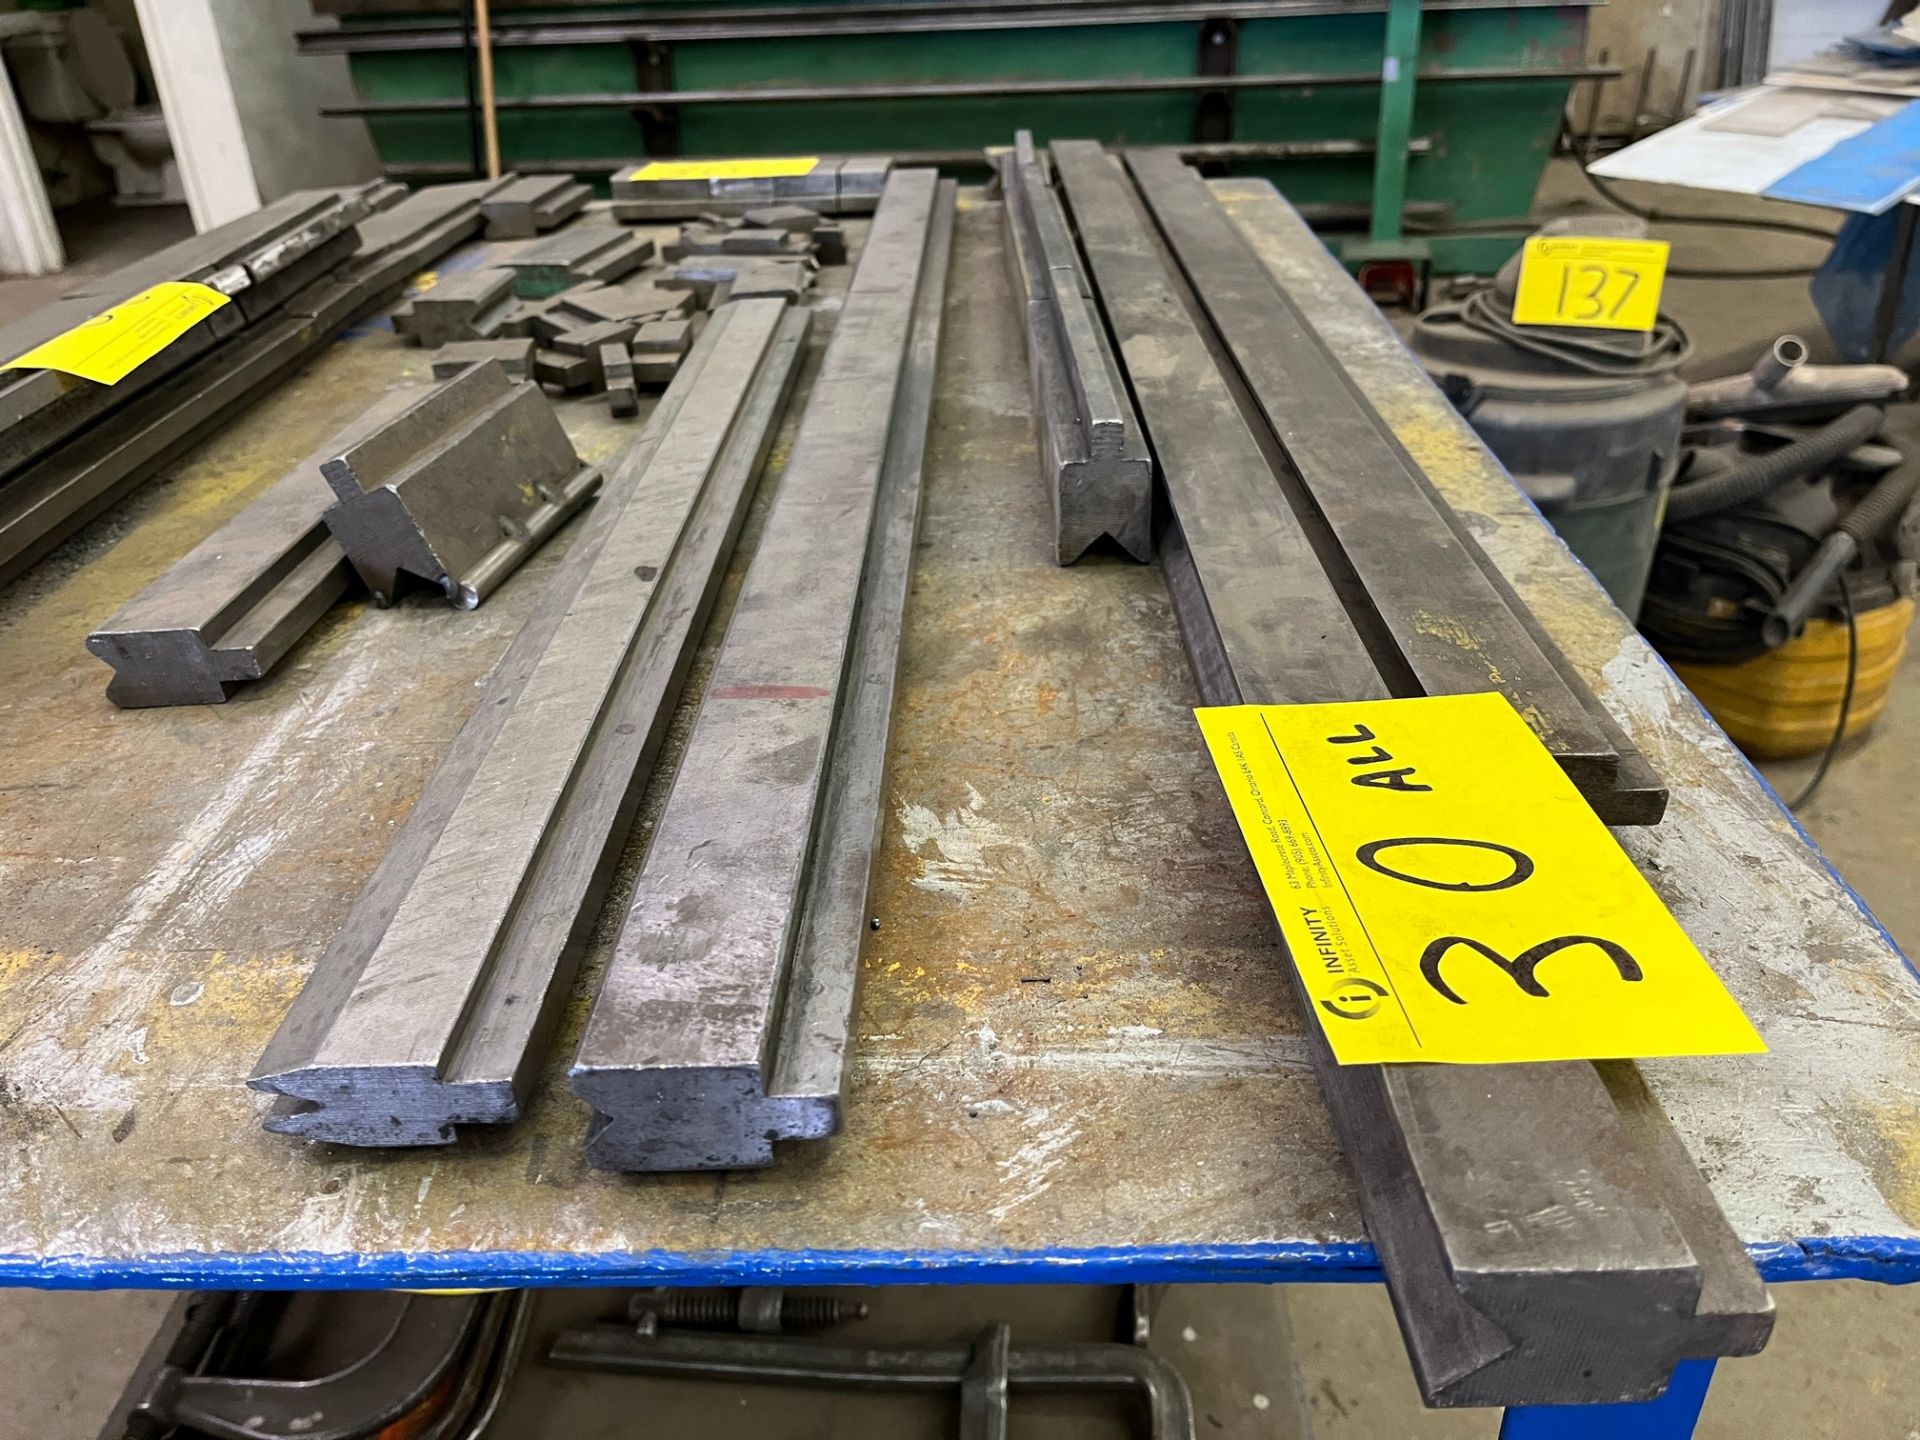 LOT OF ASST. PRESS BRAKE DIES UP TO 10'L (UPPER AND LOWER) - Image 2 of 2